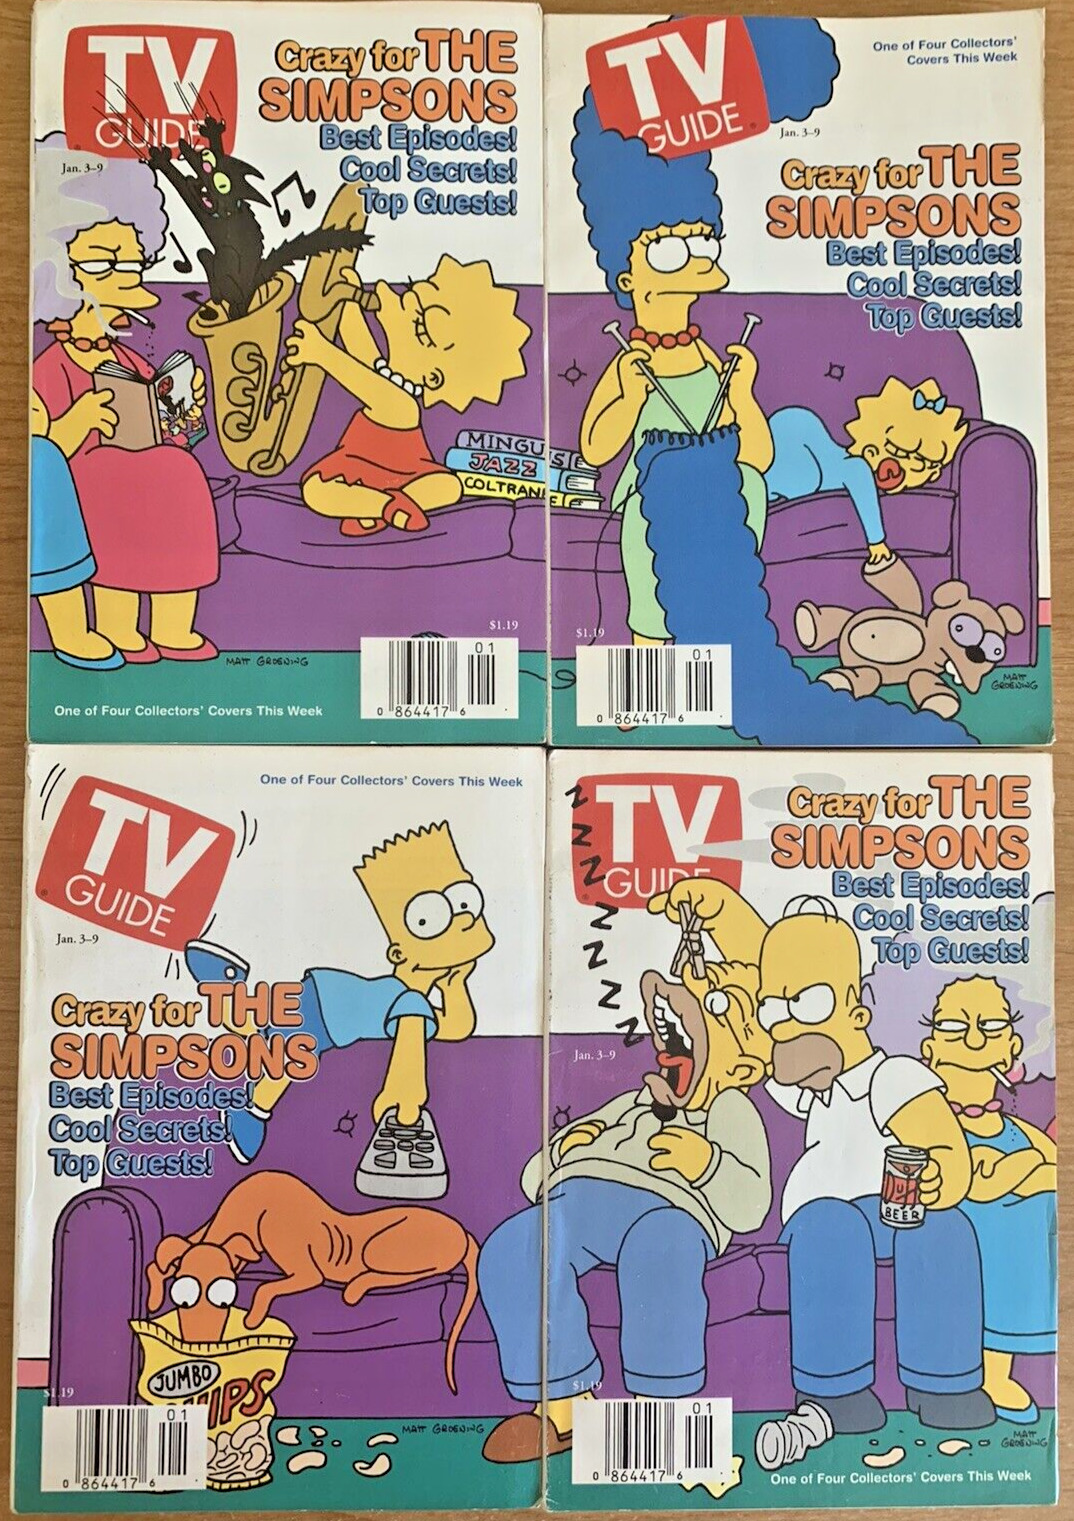 The Simpsons  TV Guide. Complete Set of 4 Collector Covers Jan 3-9 1998 Cartoon